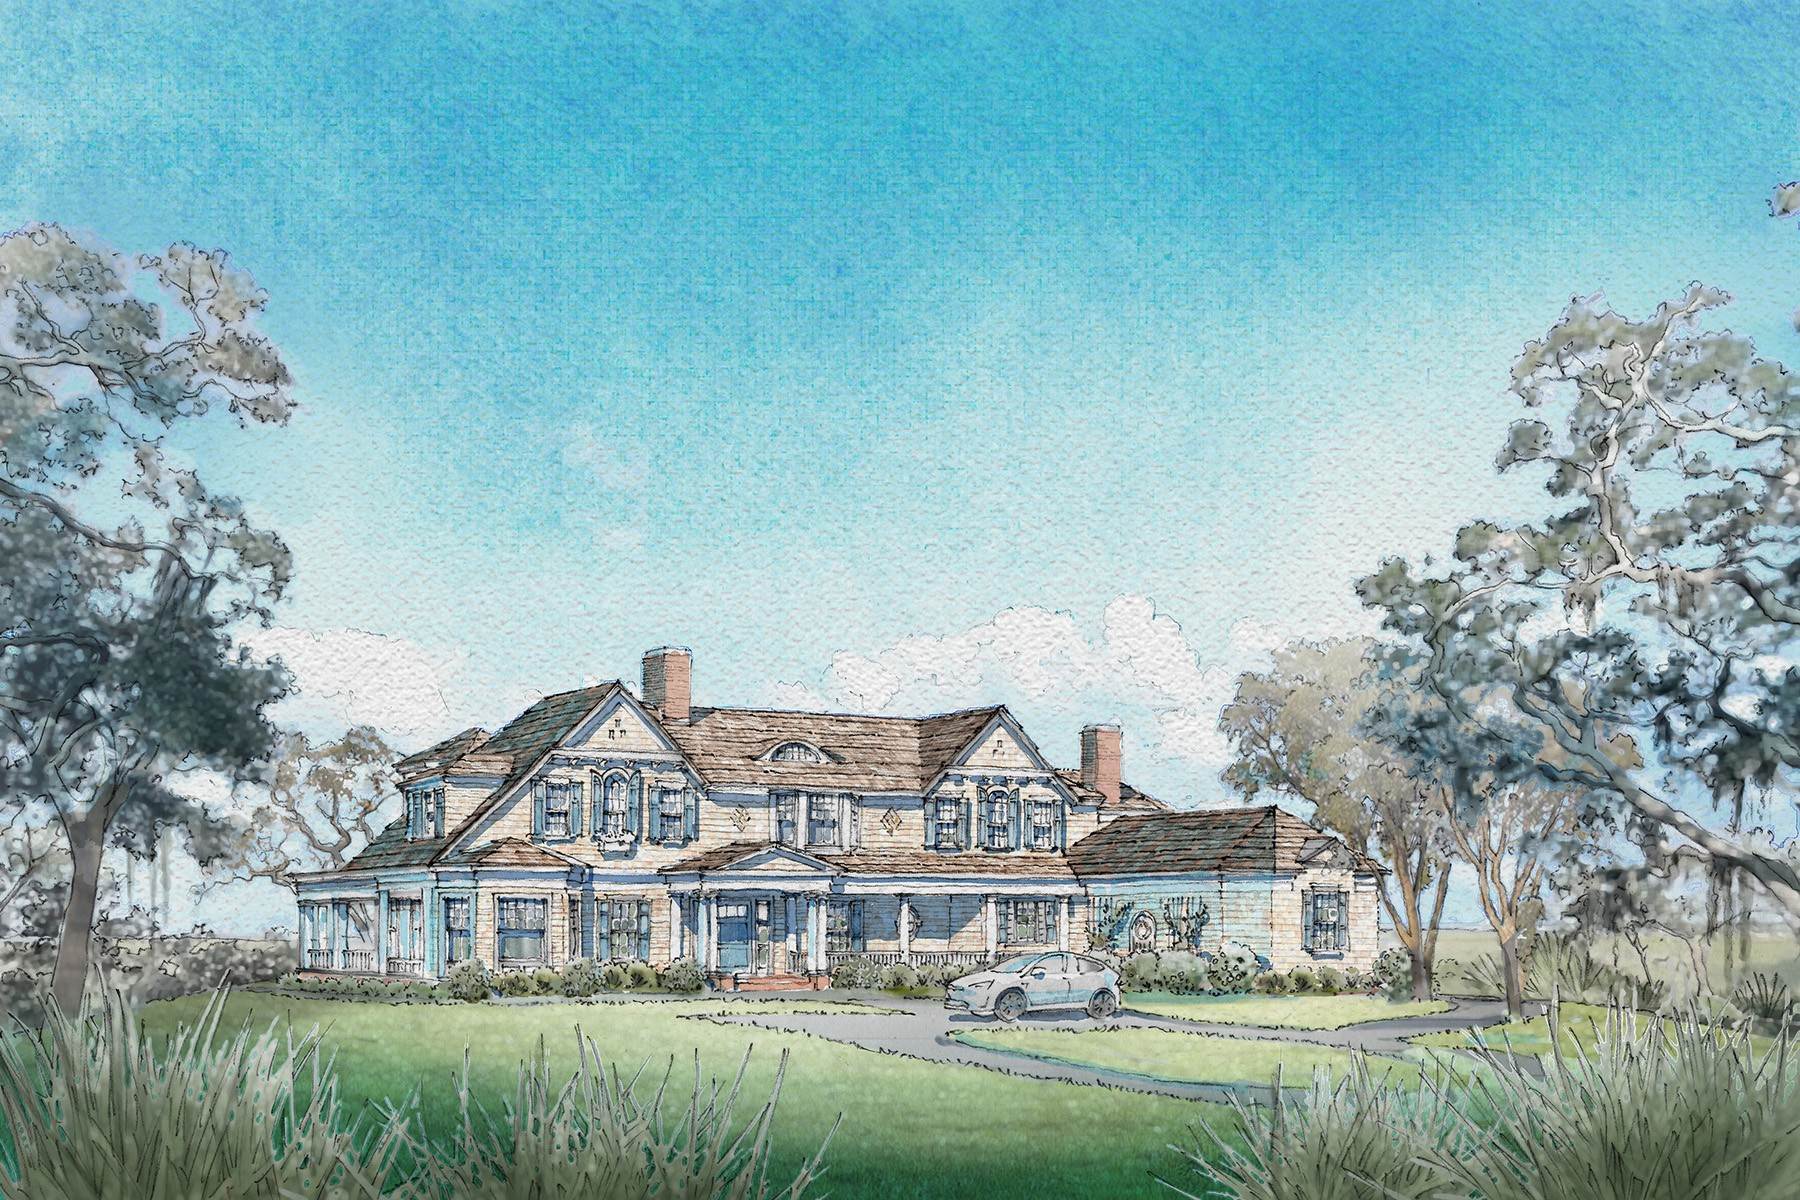 Single Family Homes for Sale at Extraordinary Waterfront Custom Designed Estate 144 Point Lane St. Simons Island, Georgia 31522 United States